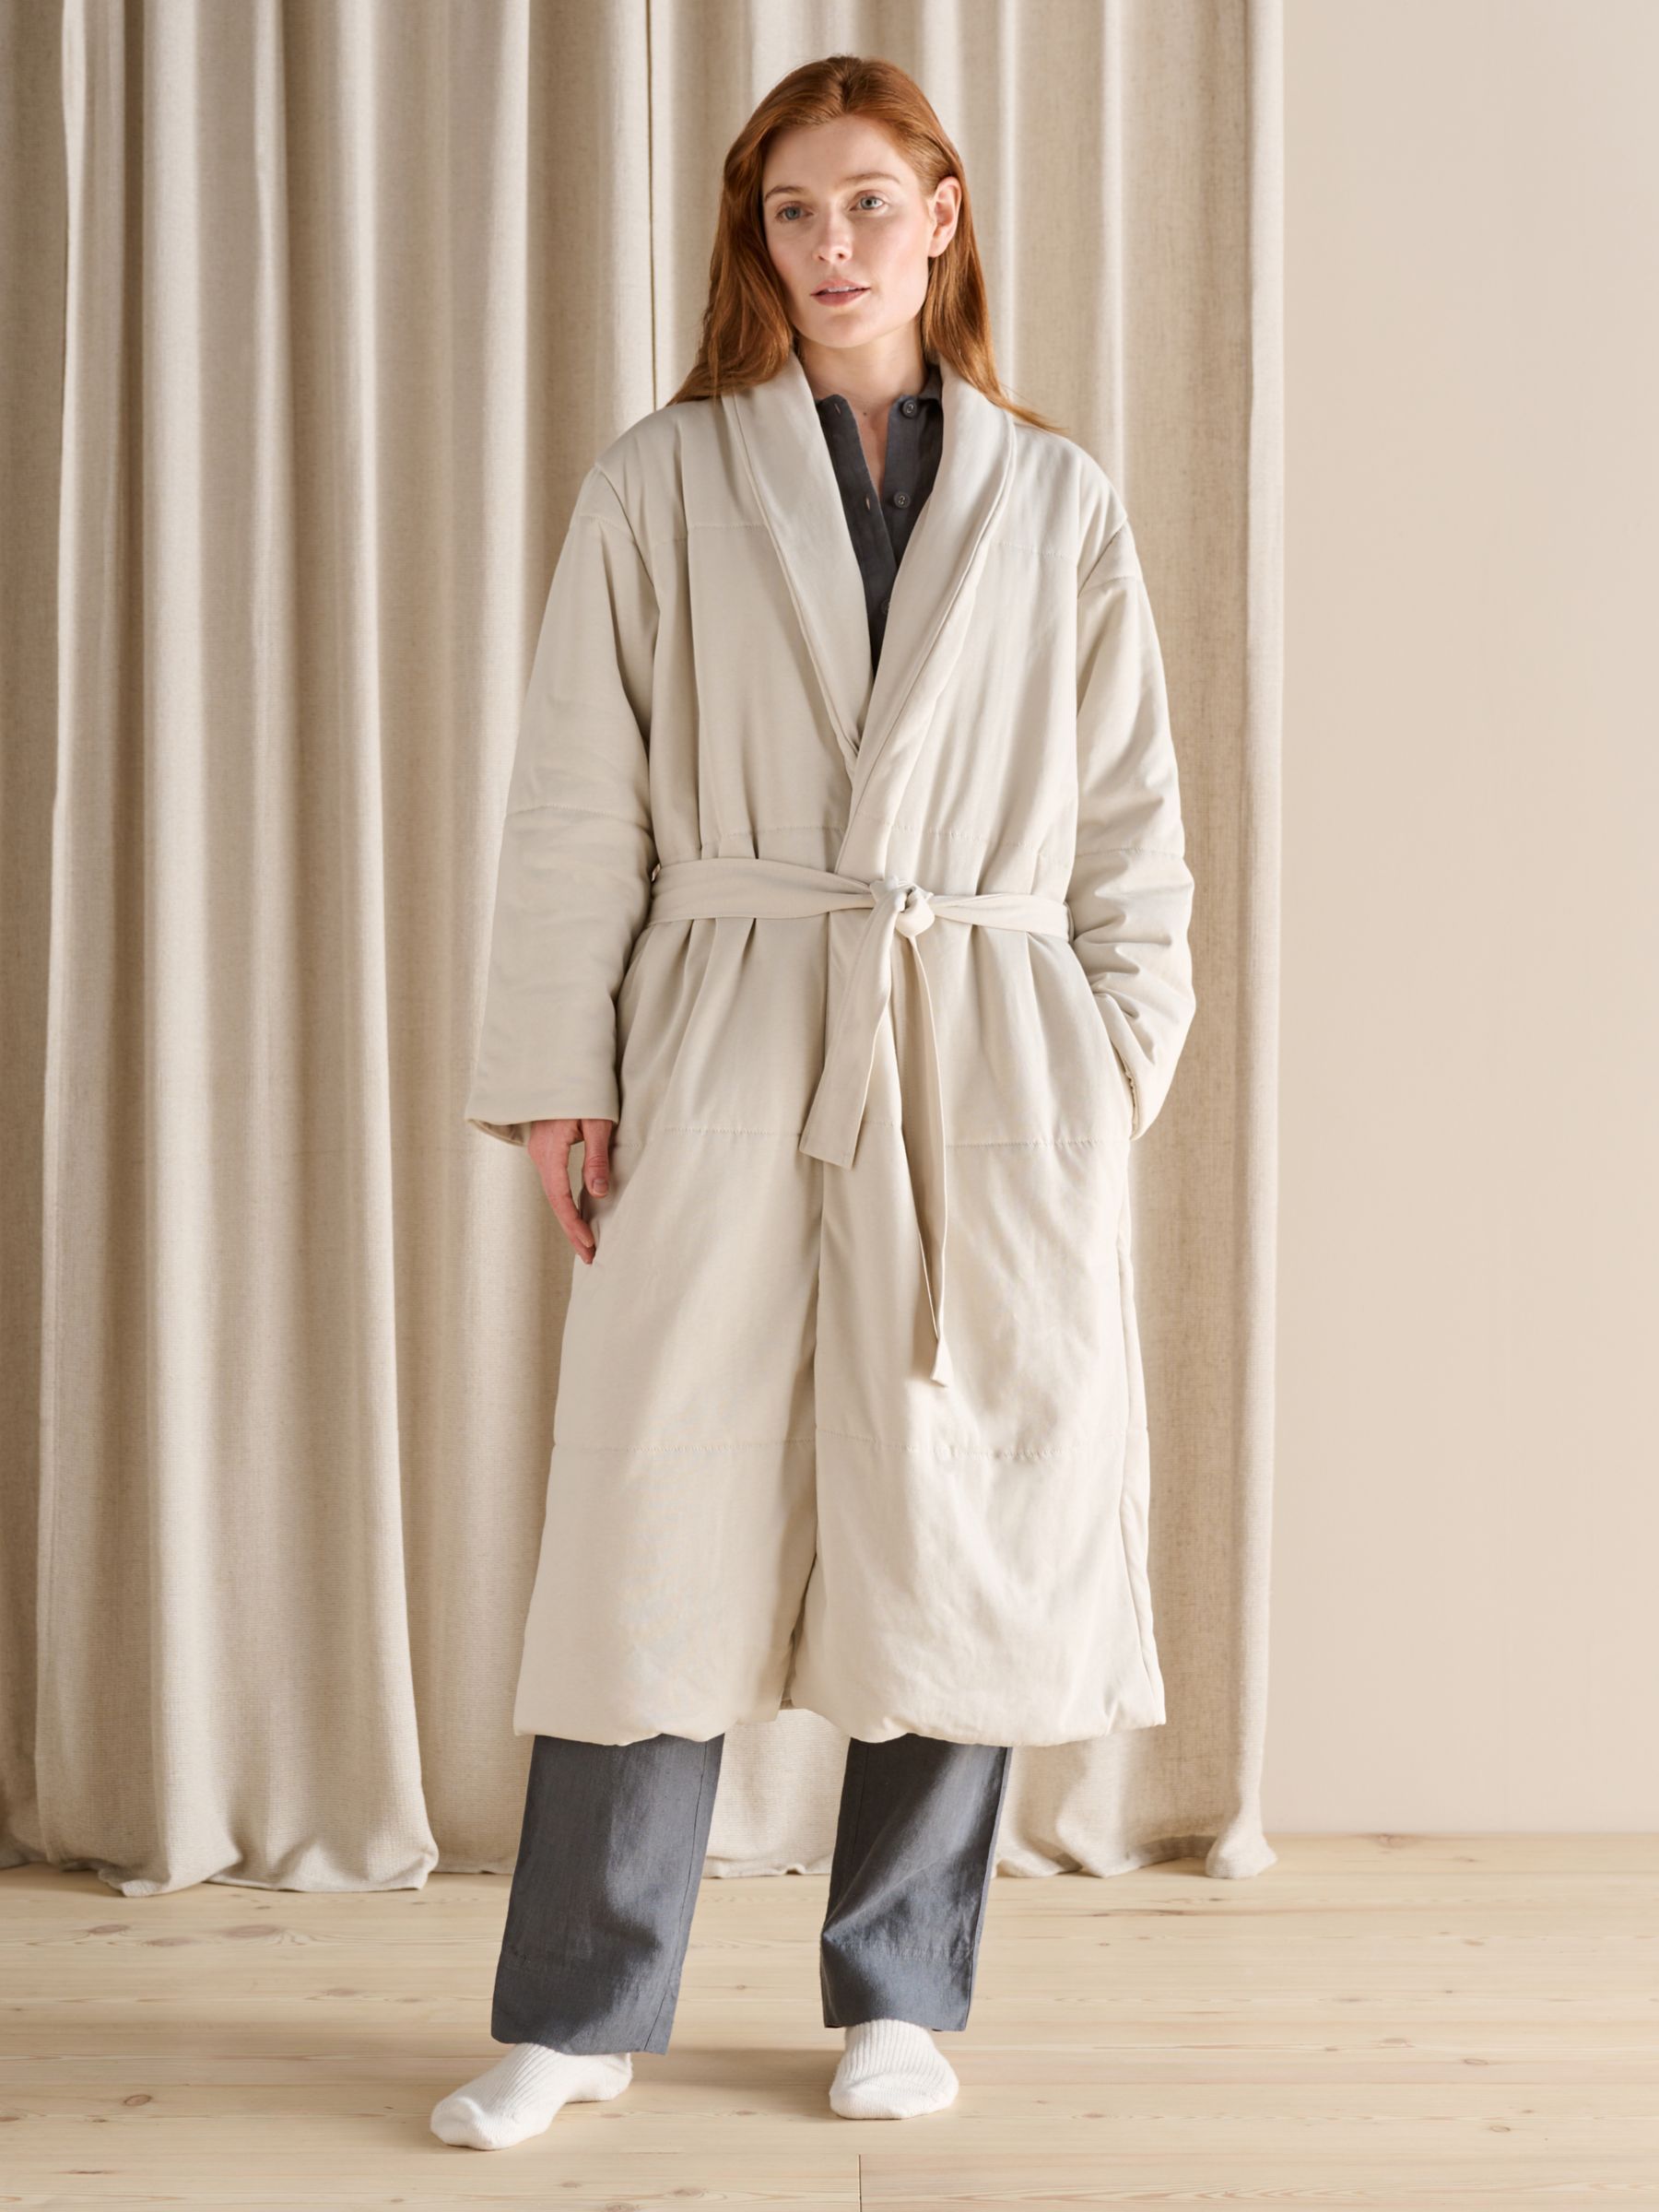 Bedfolk Housecoat Cotton Dressing Gown Robe, Clay at John Lewis & Partners